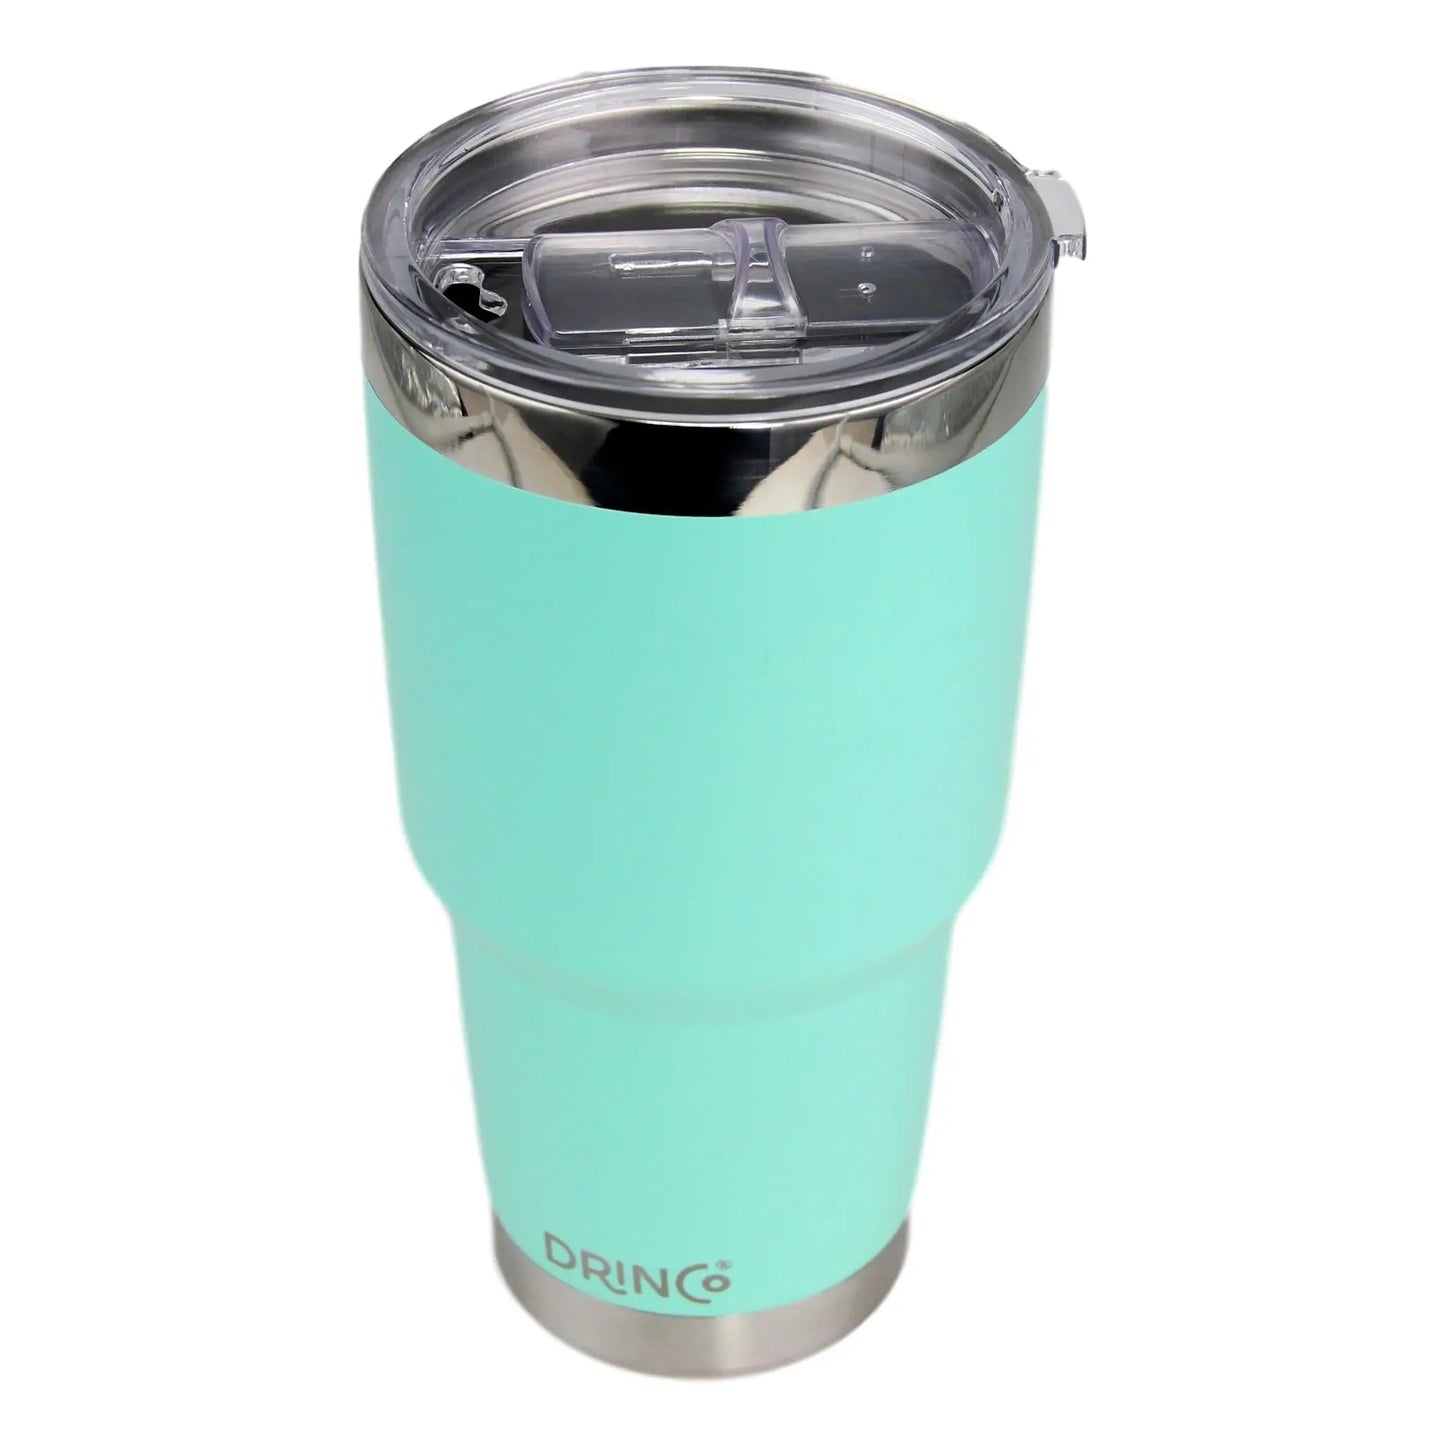 DRINCO® 30oz Insulated Tumbler Spill Proof Lid w/2 Straws (Teal) - Image #3